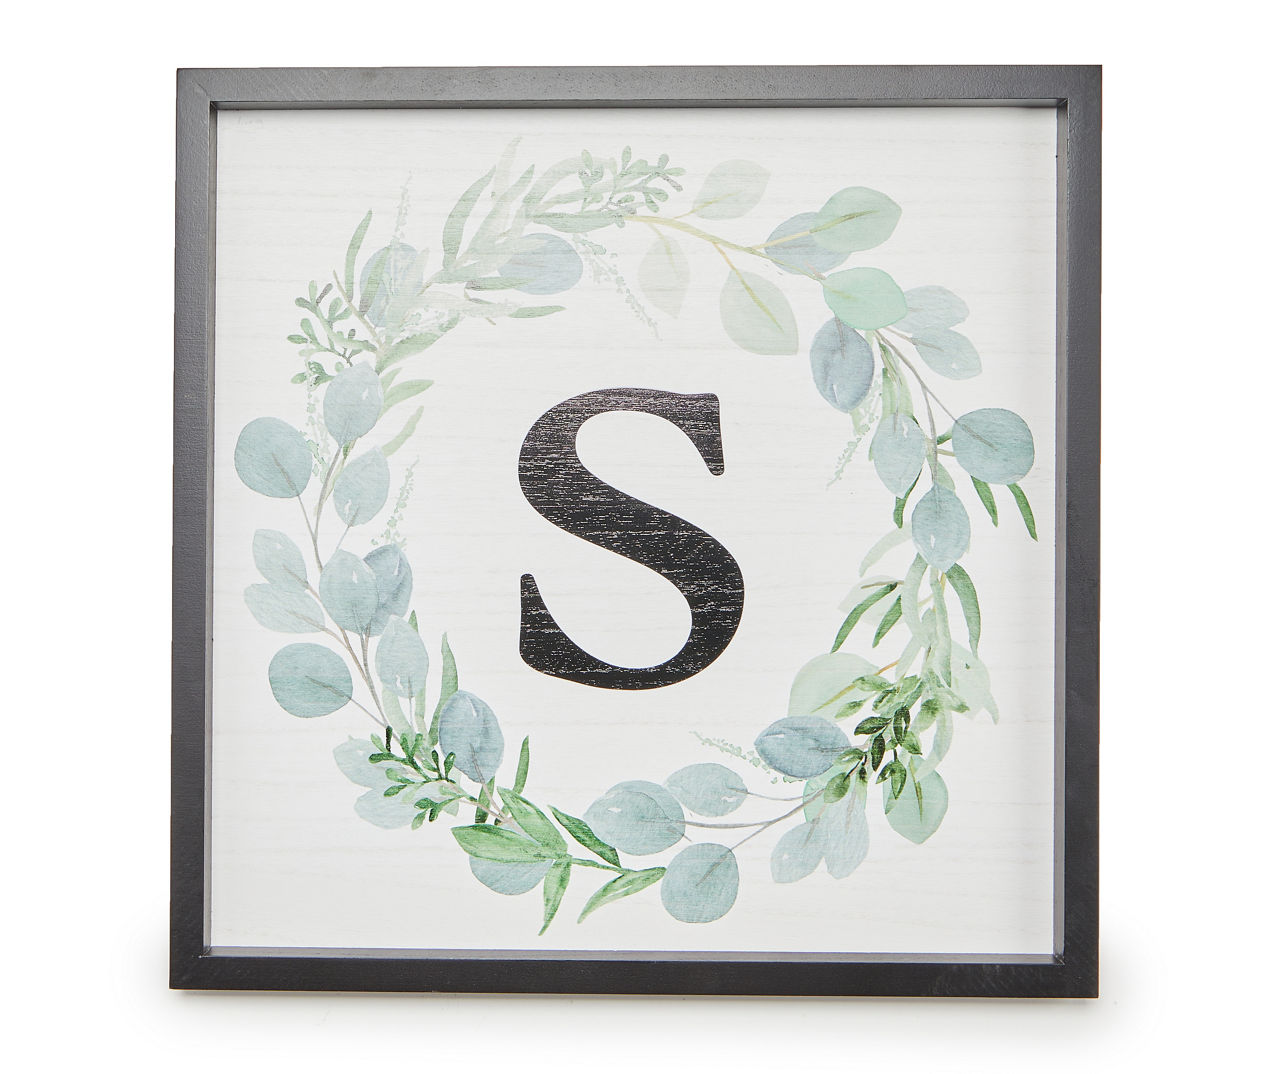 "S" White, Green & Black Wreath Initial Framed Wall Plaque